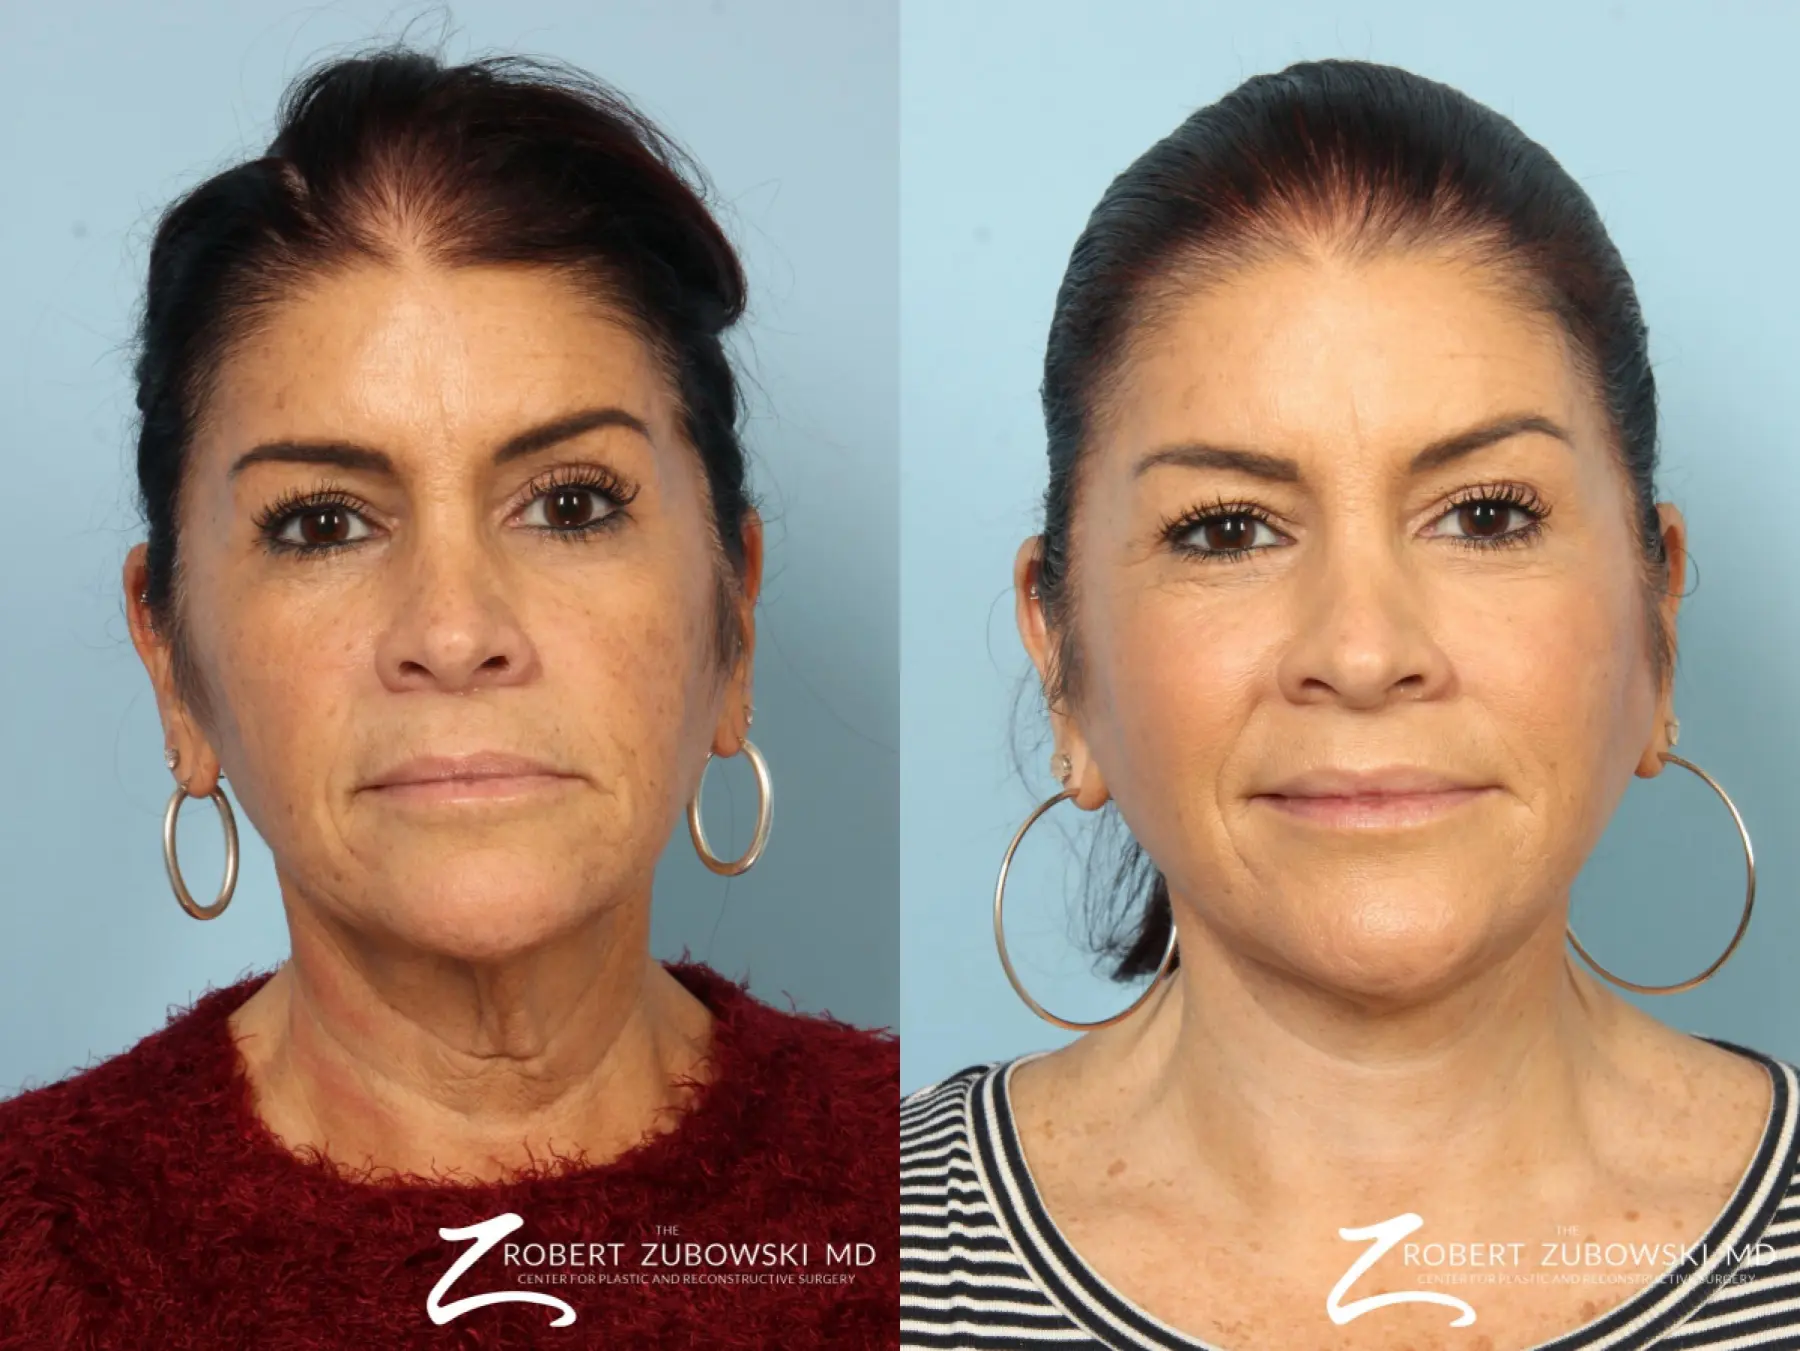 Neck Lift: Patient 1 - Before and After  